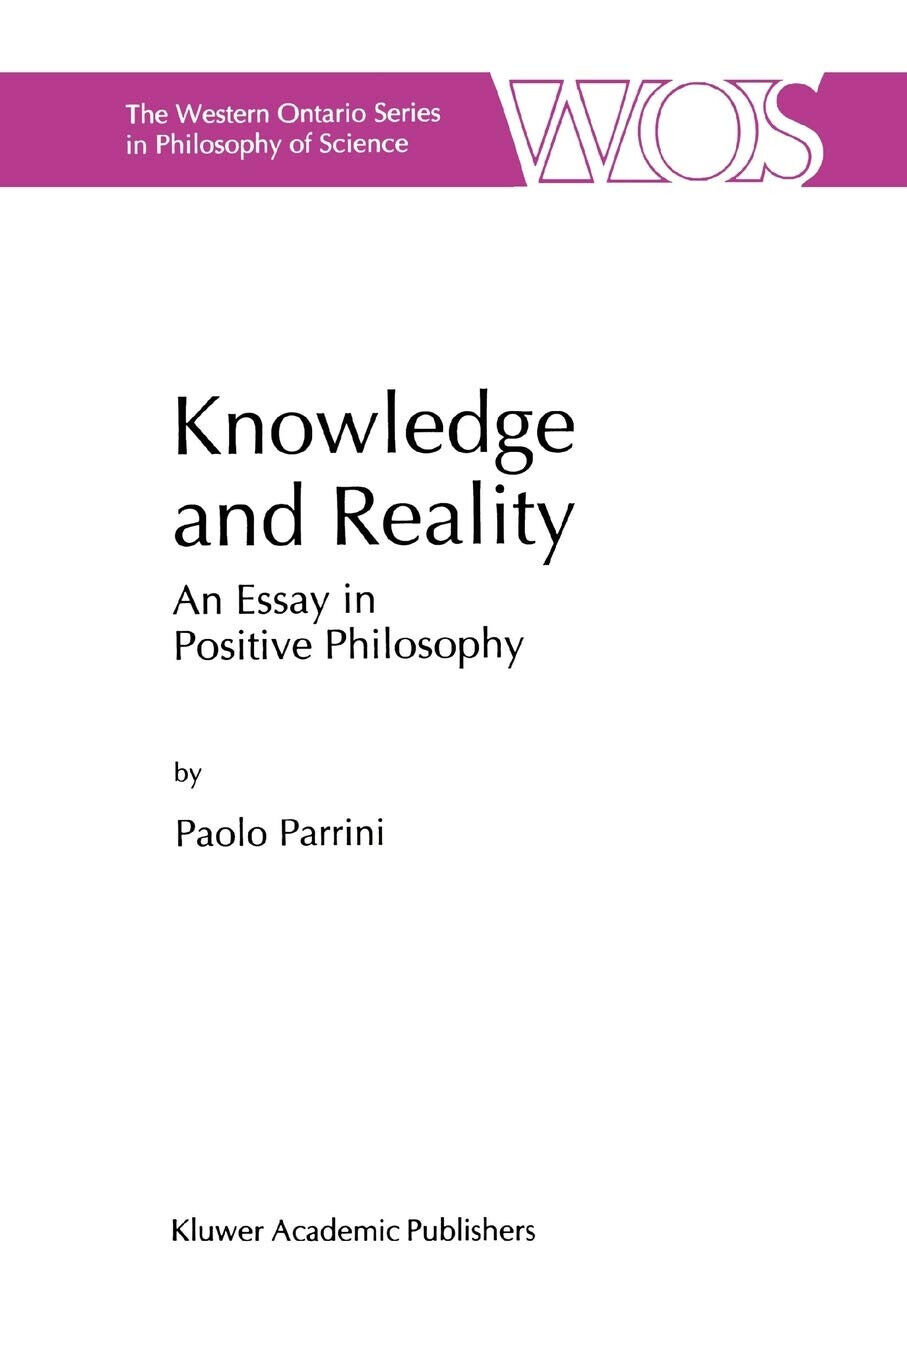 Knowledge and Reality - P. Parrini - Springer, 2010